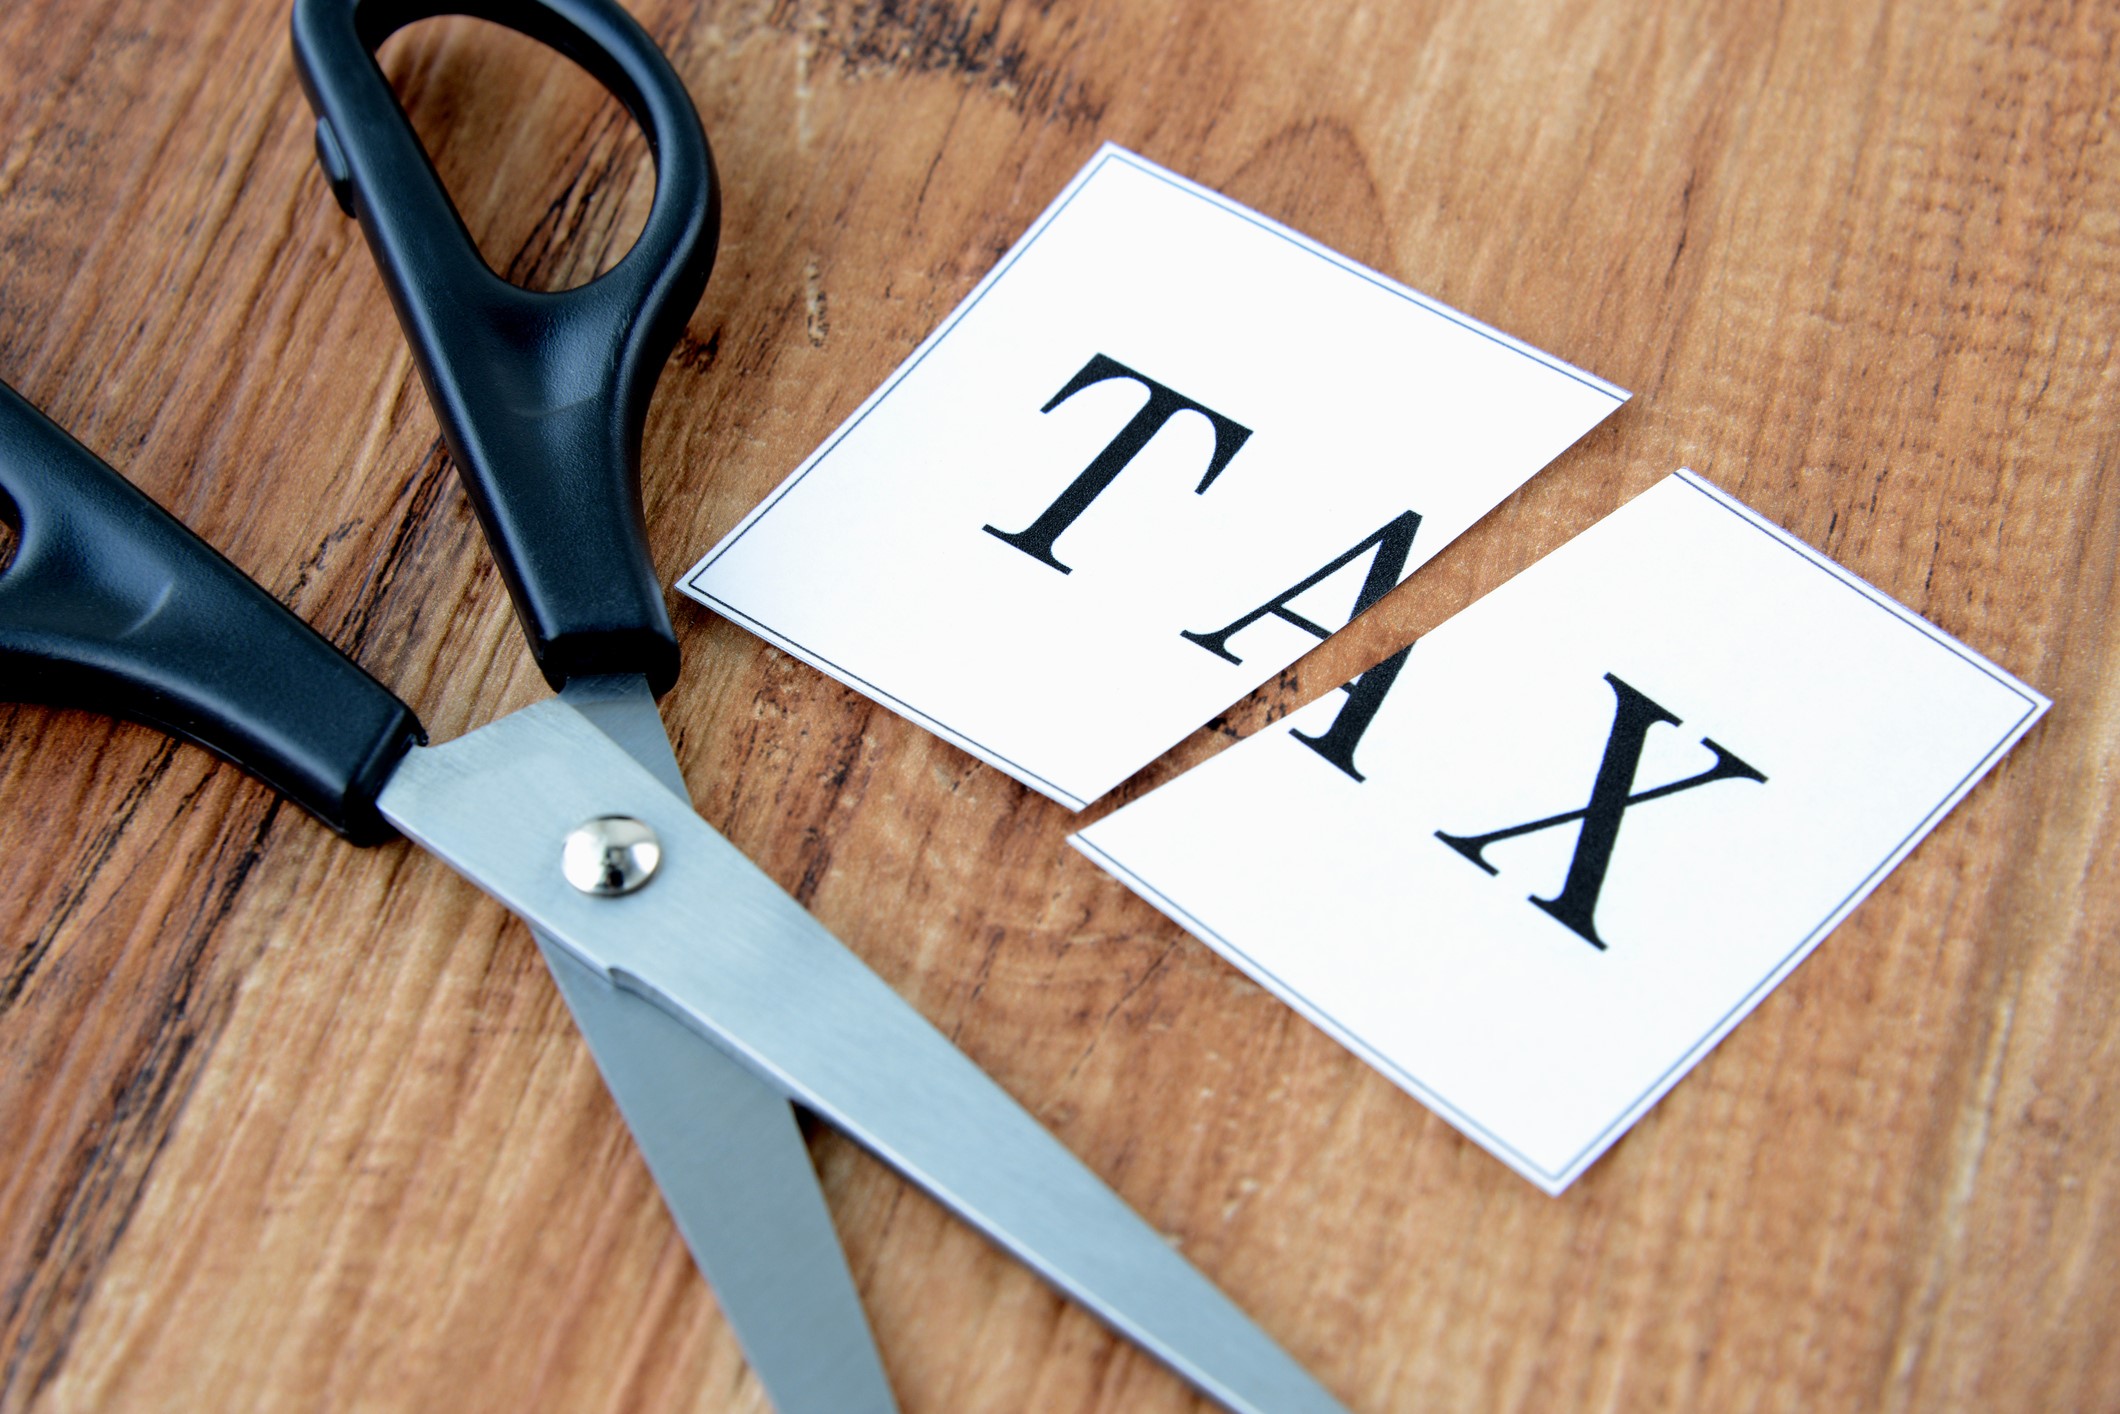 Strategies to Help Maximize Income and Minimize Taxes